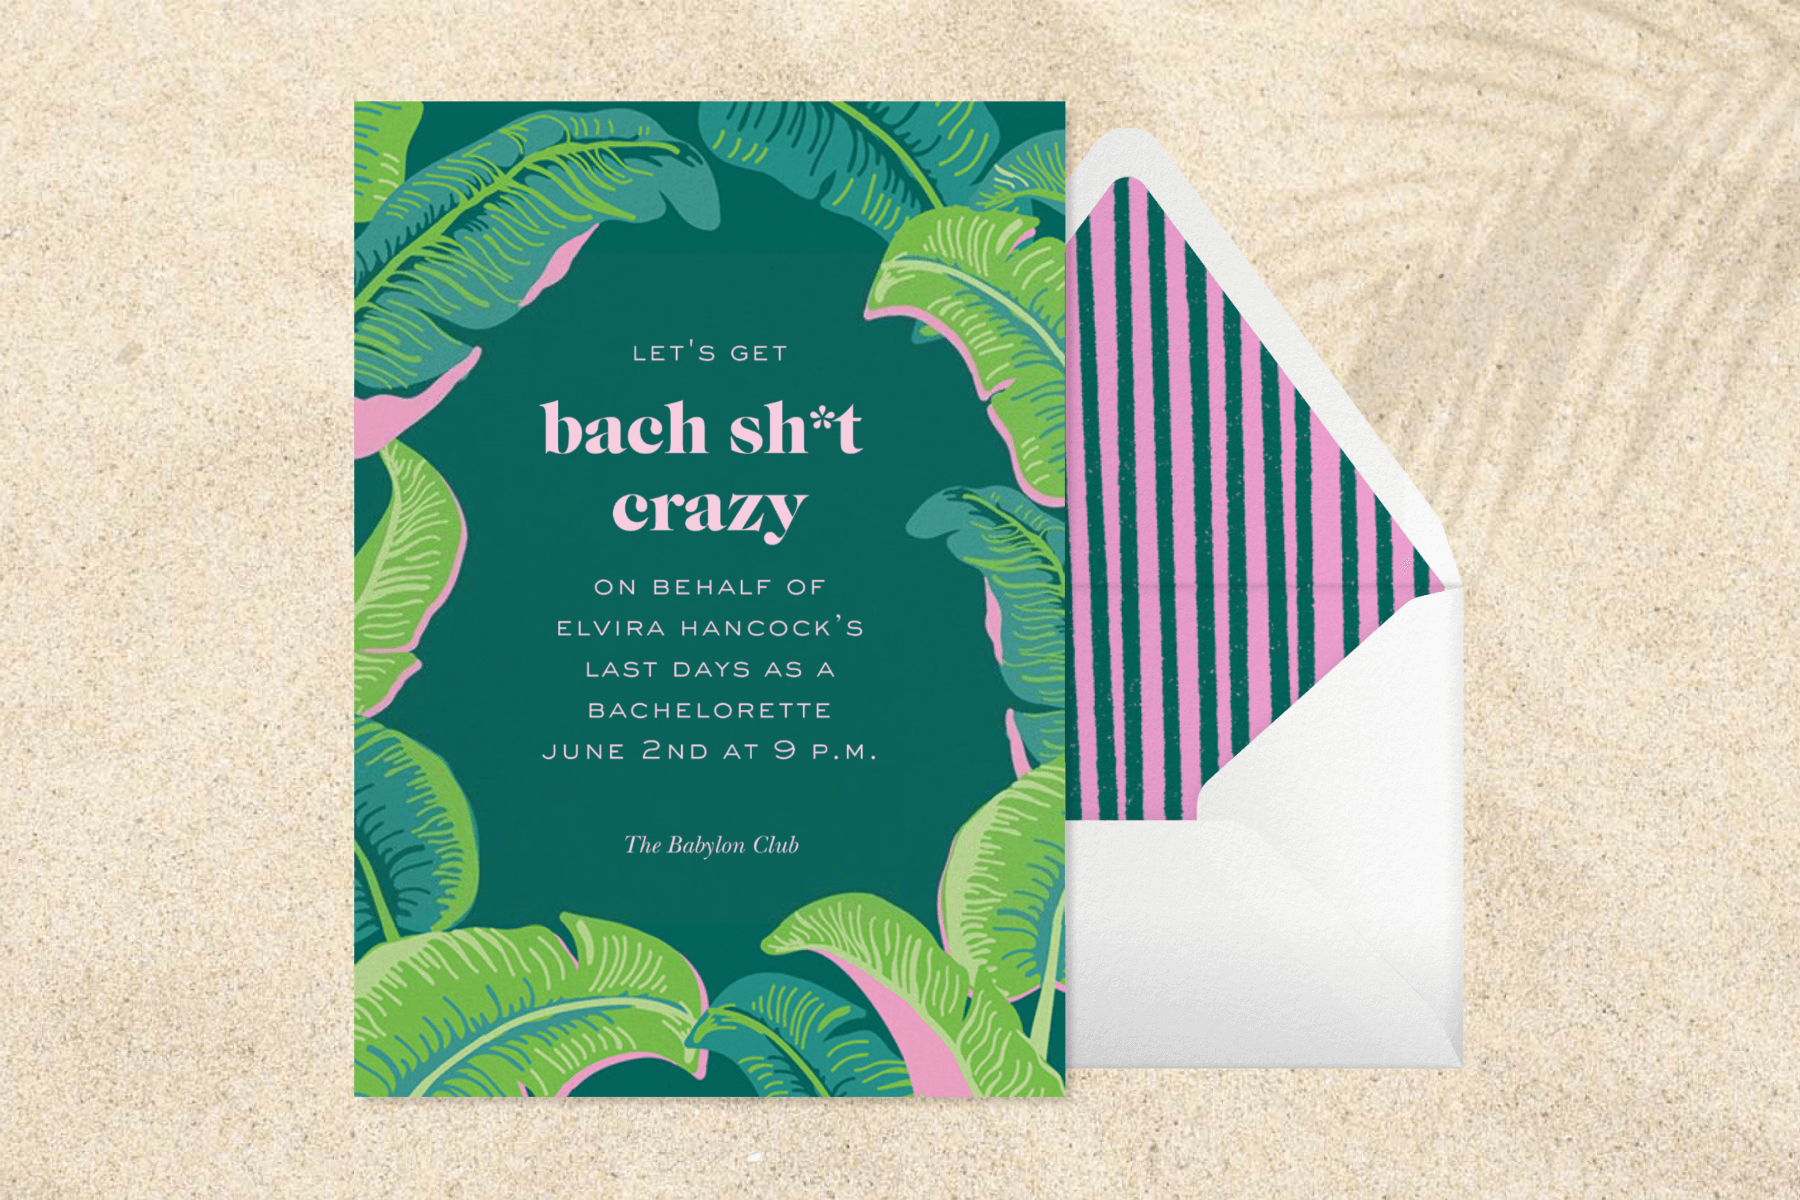 A dark green bachelorette party invitation with green and pink banana leaves around the border next to a white envelope with a pink and green striped liner.